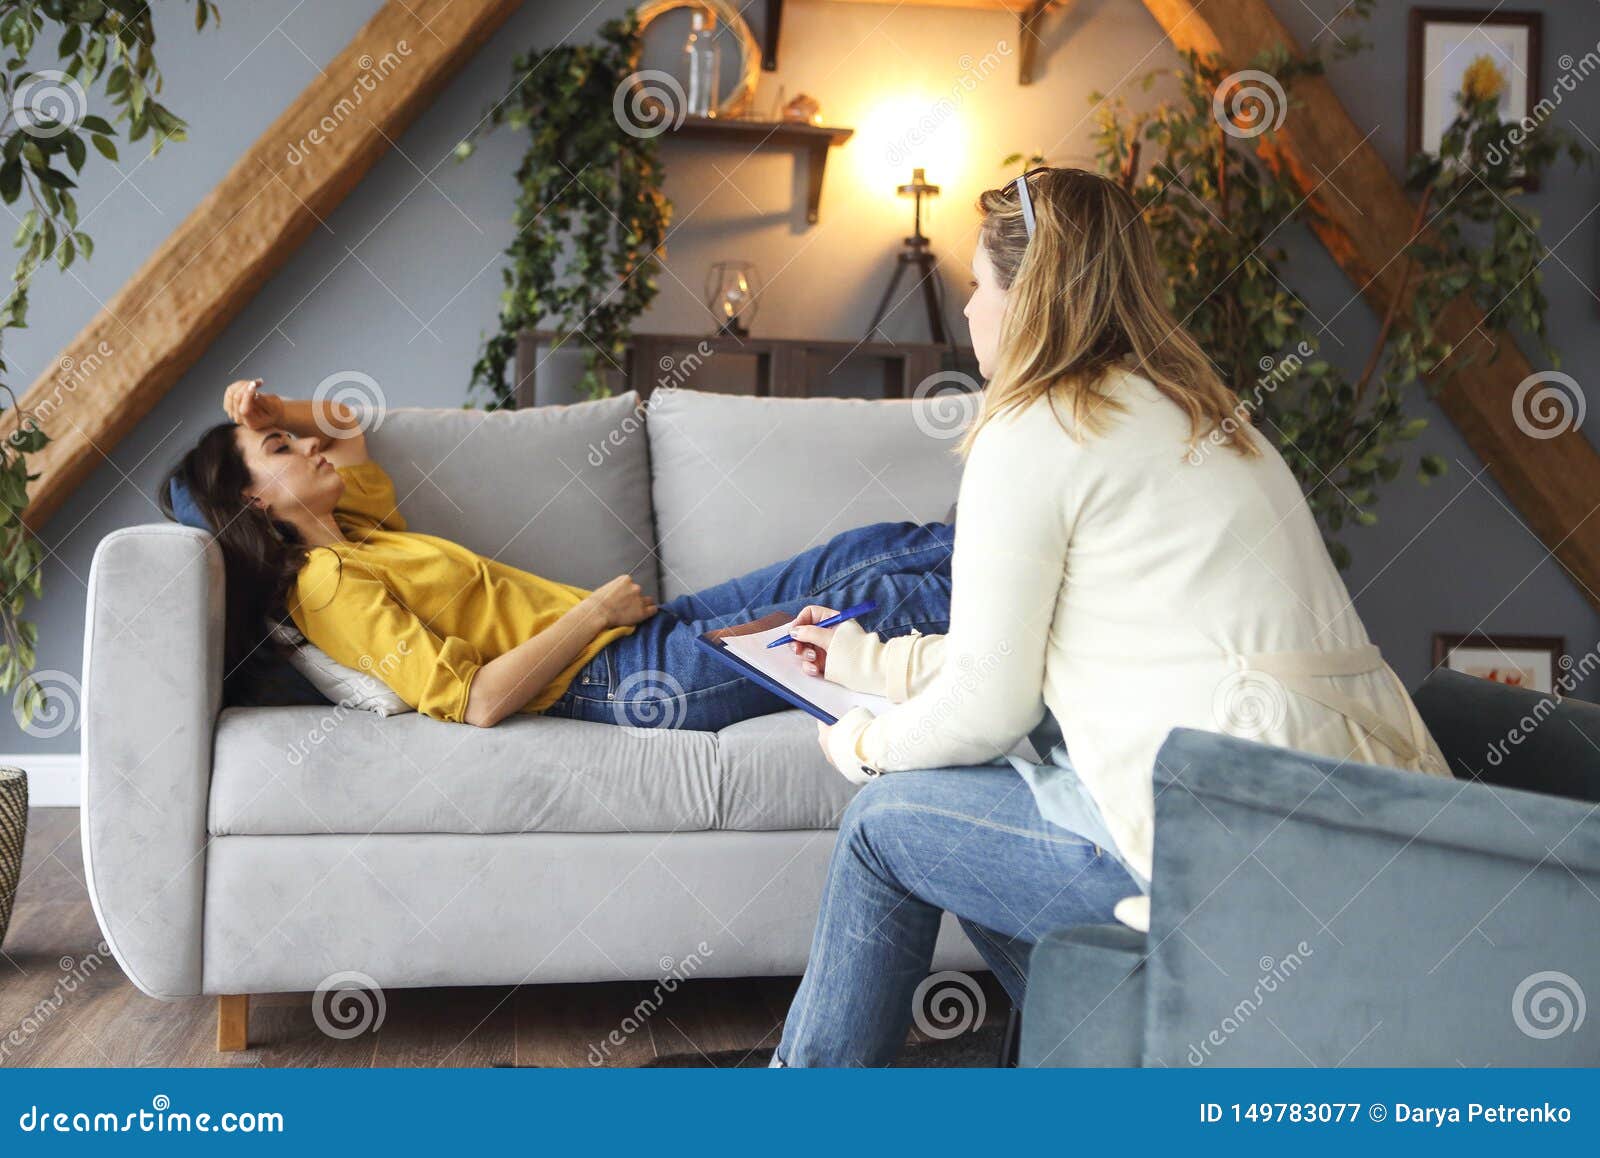 psychologist having session with her female patient